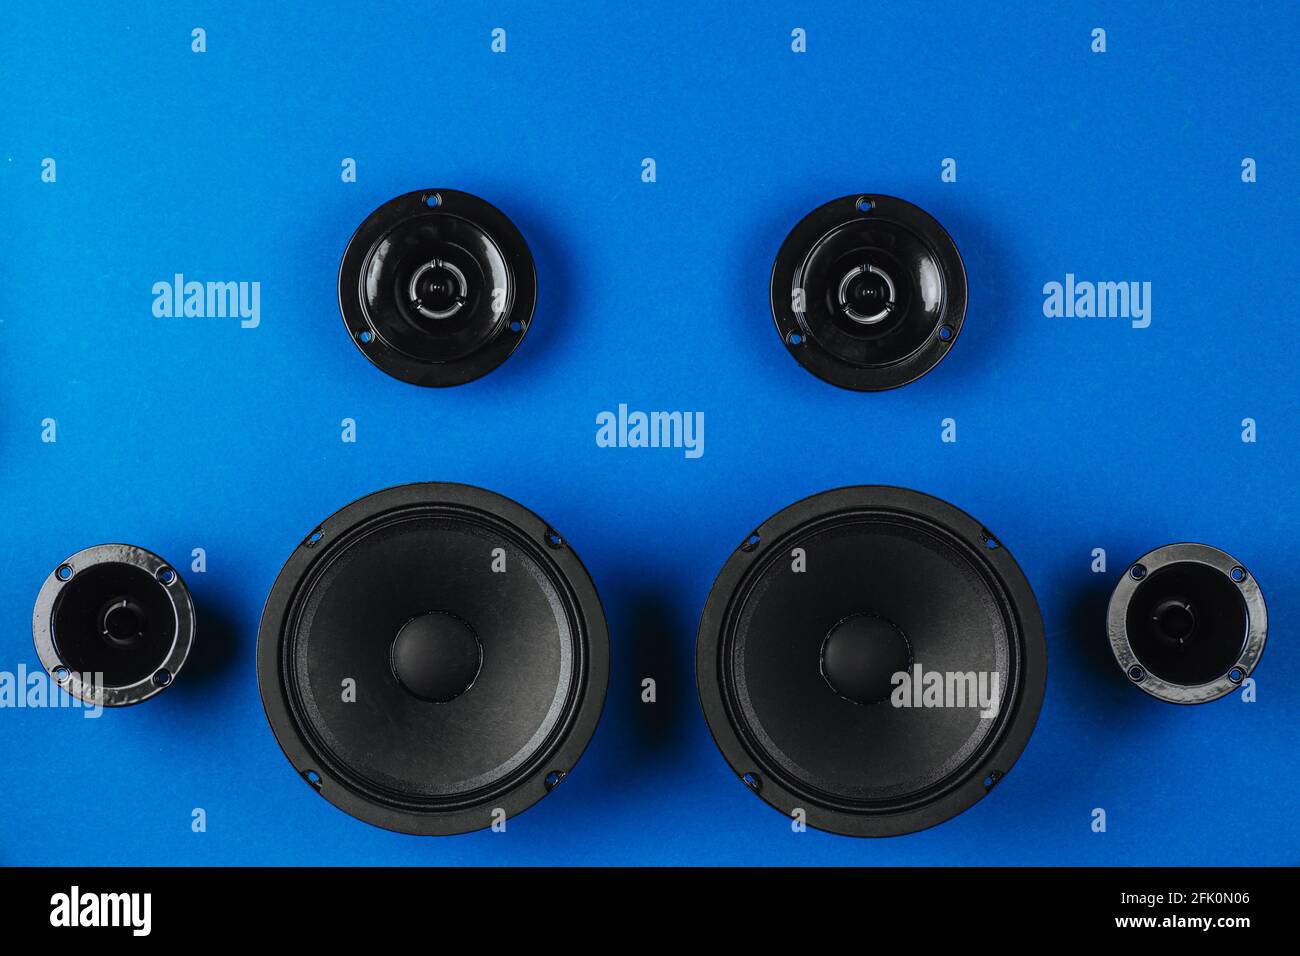 Car audio system. A set of speakers on a blue background. Stock Photo